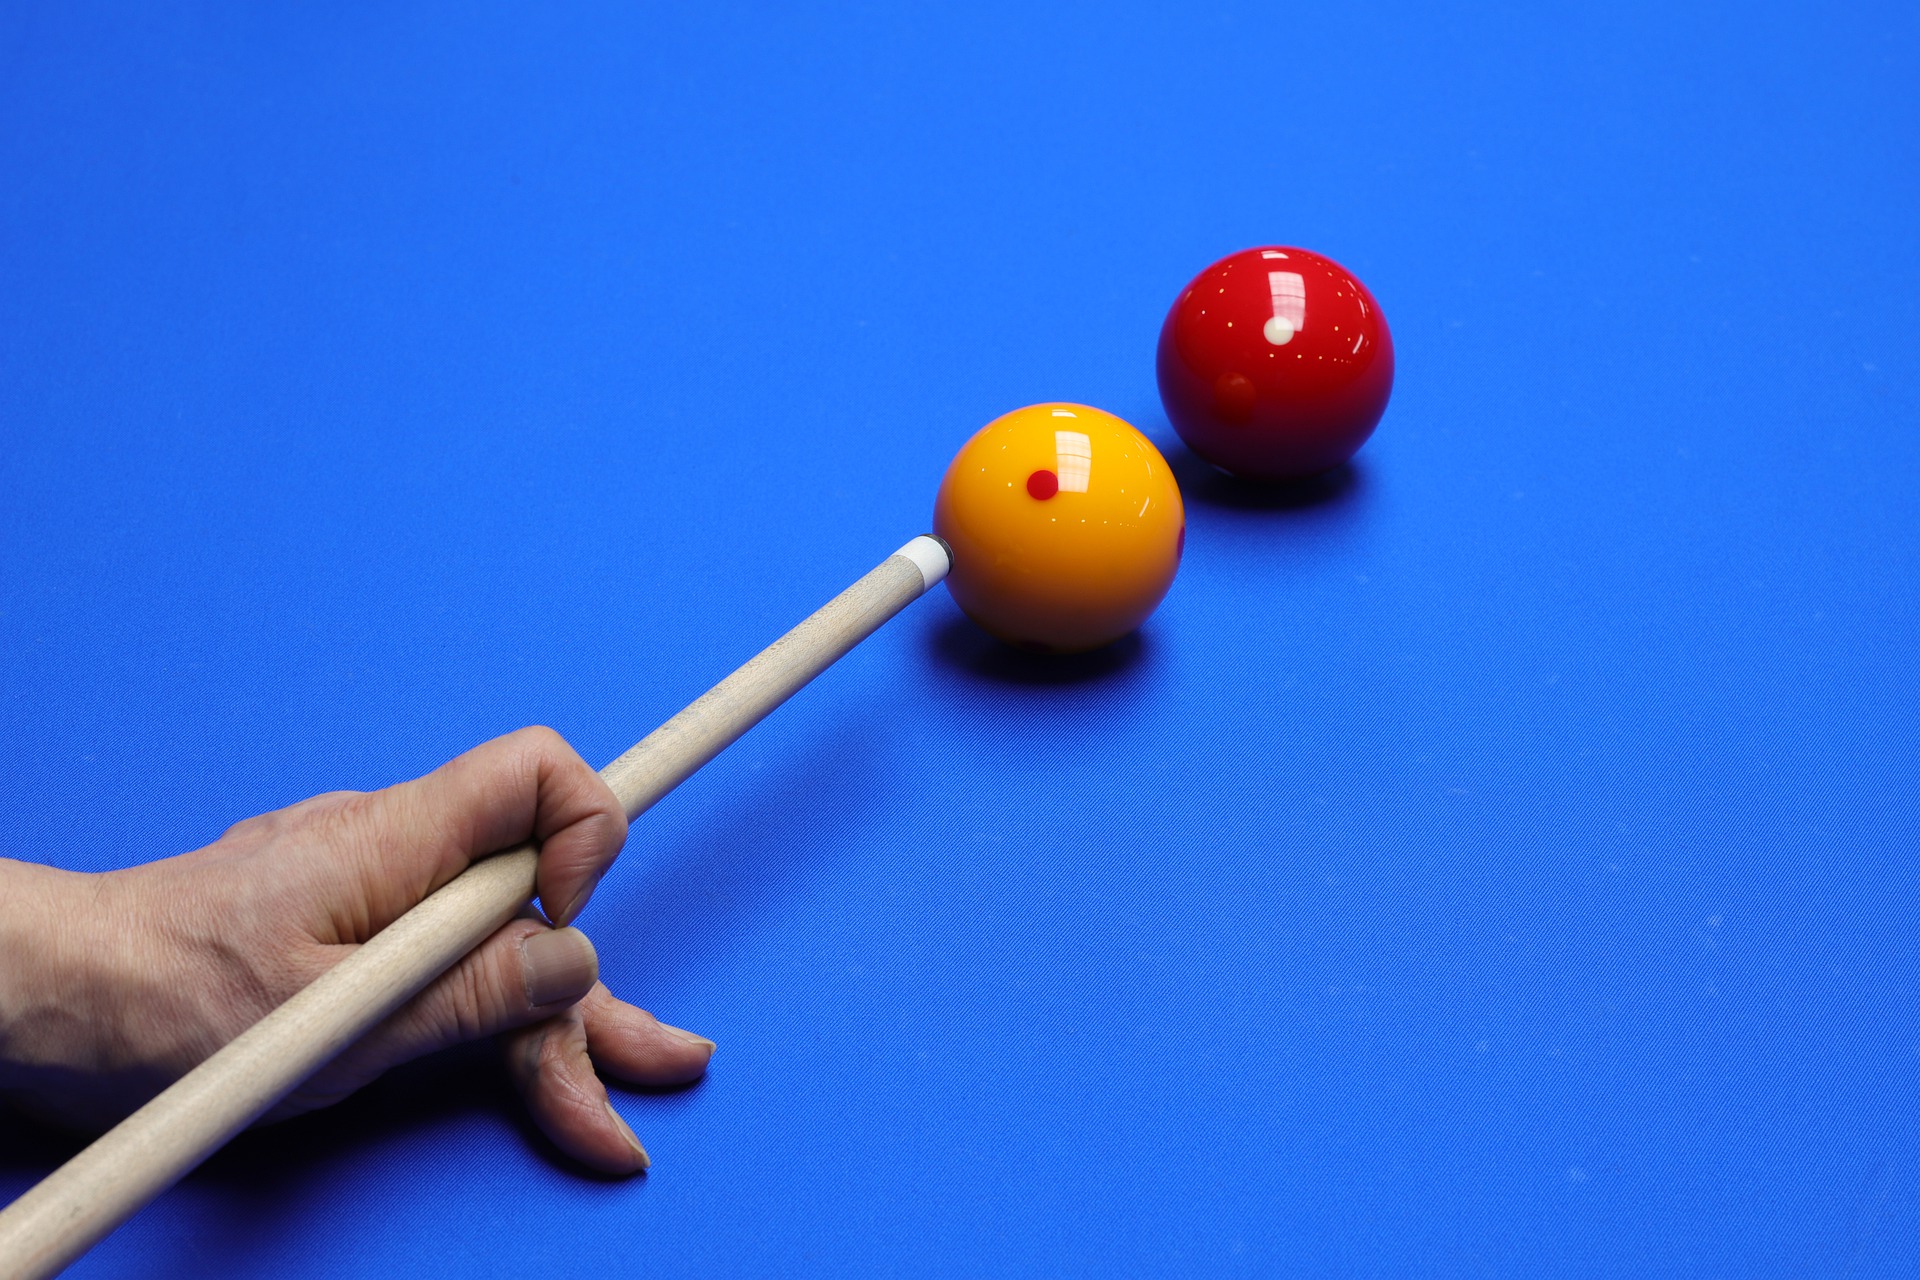 How To Hold A Pool Cue?